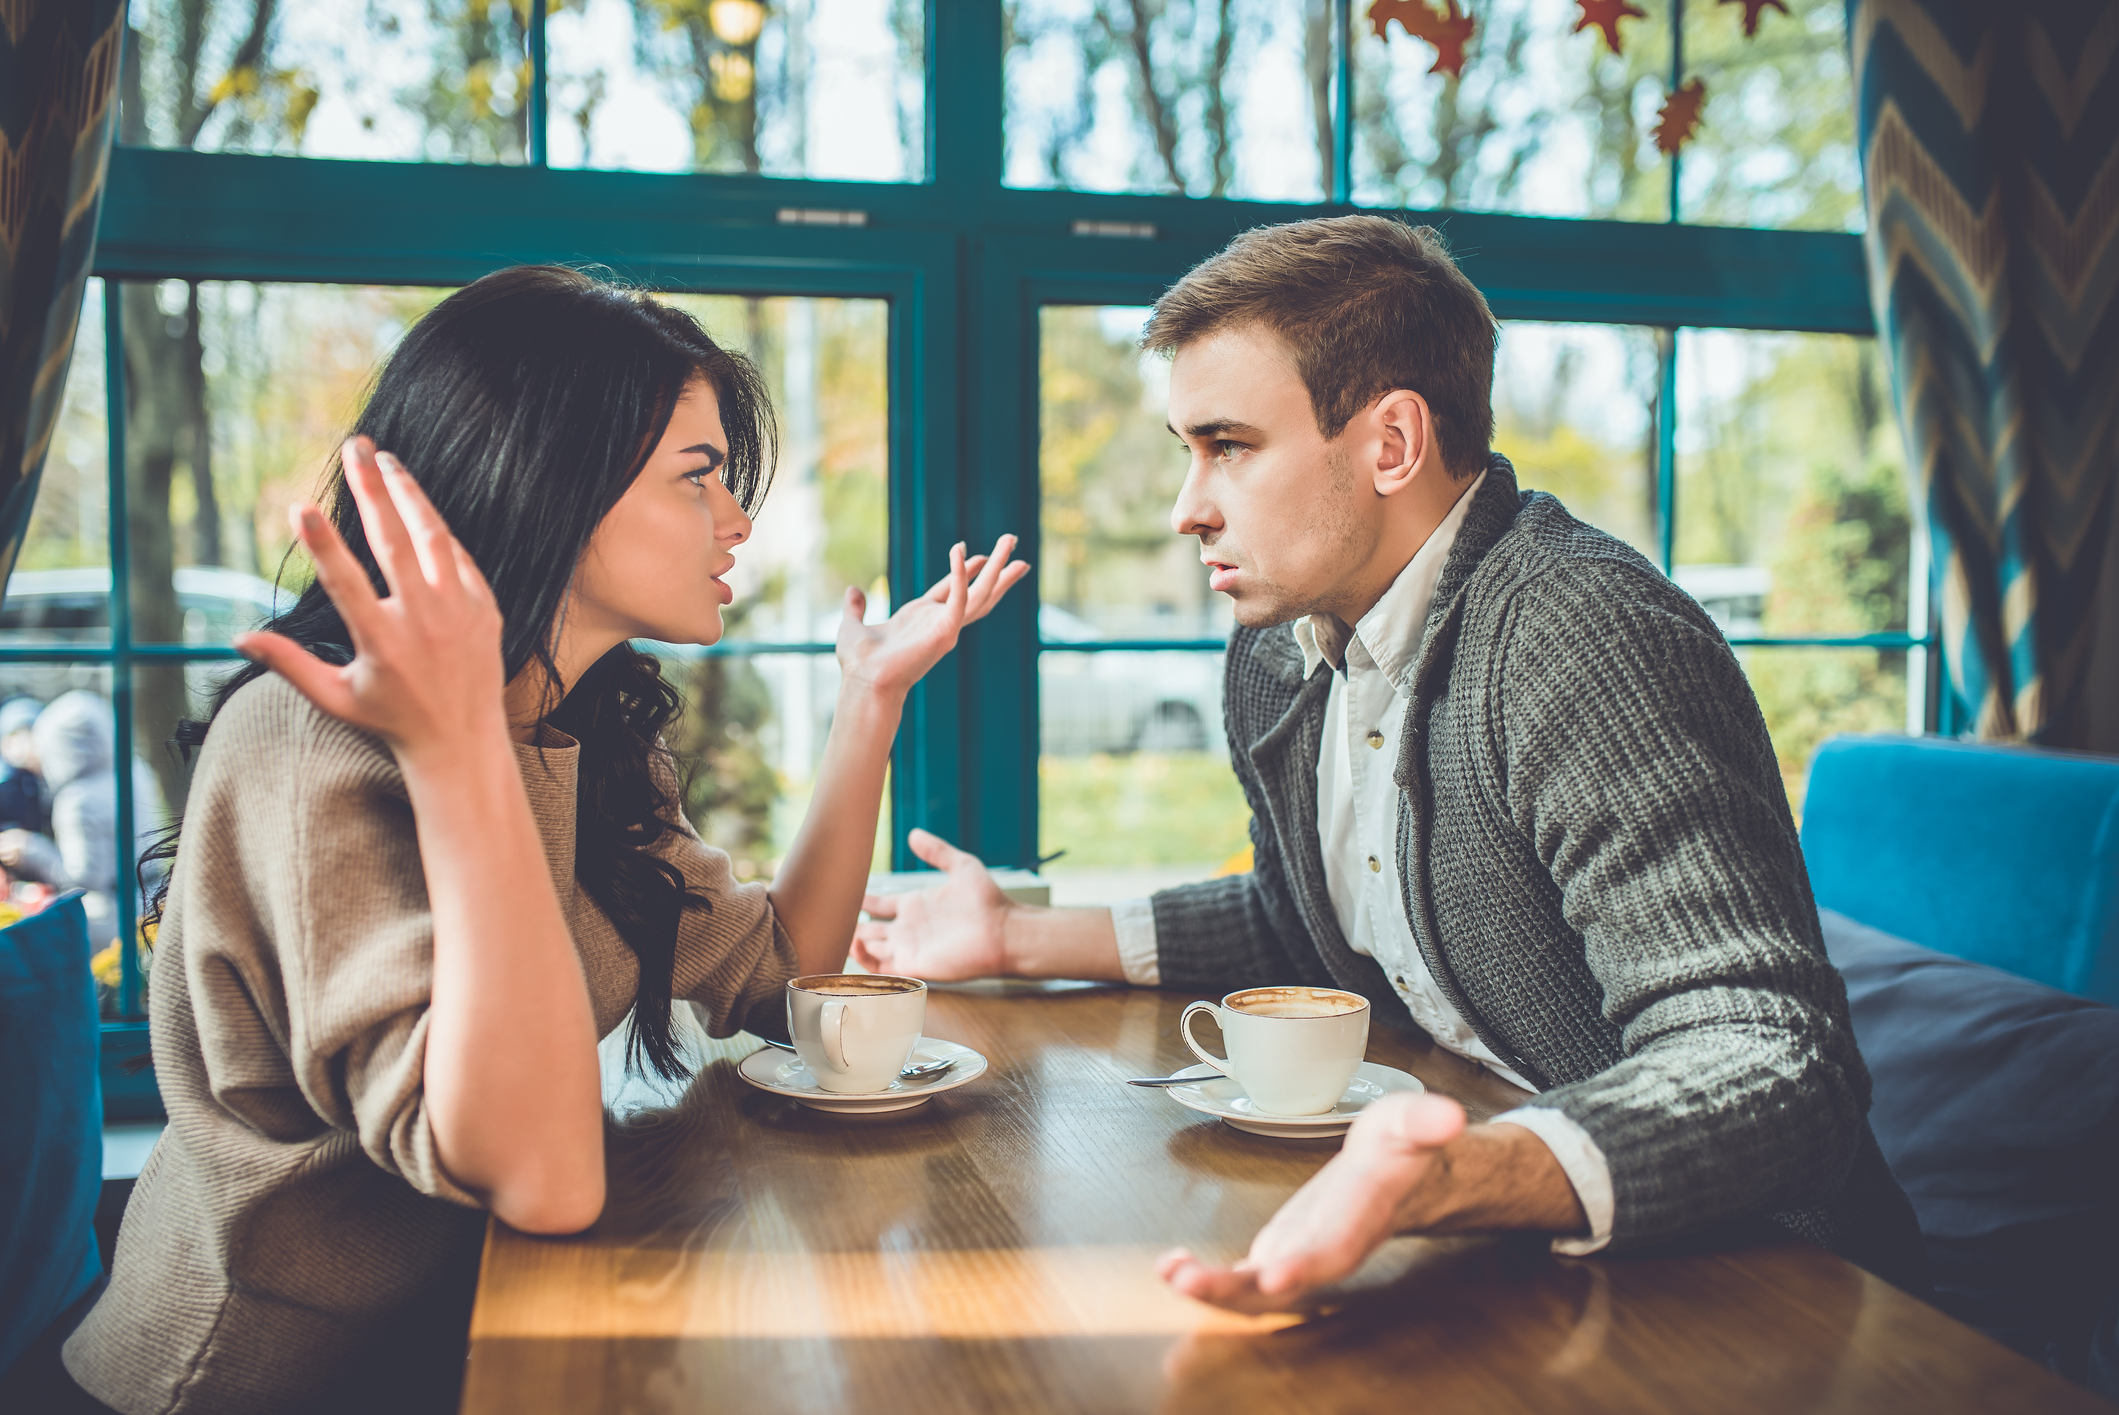 Entitled Woman Expecting Husband To Pay For Everything Sparks Fury